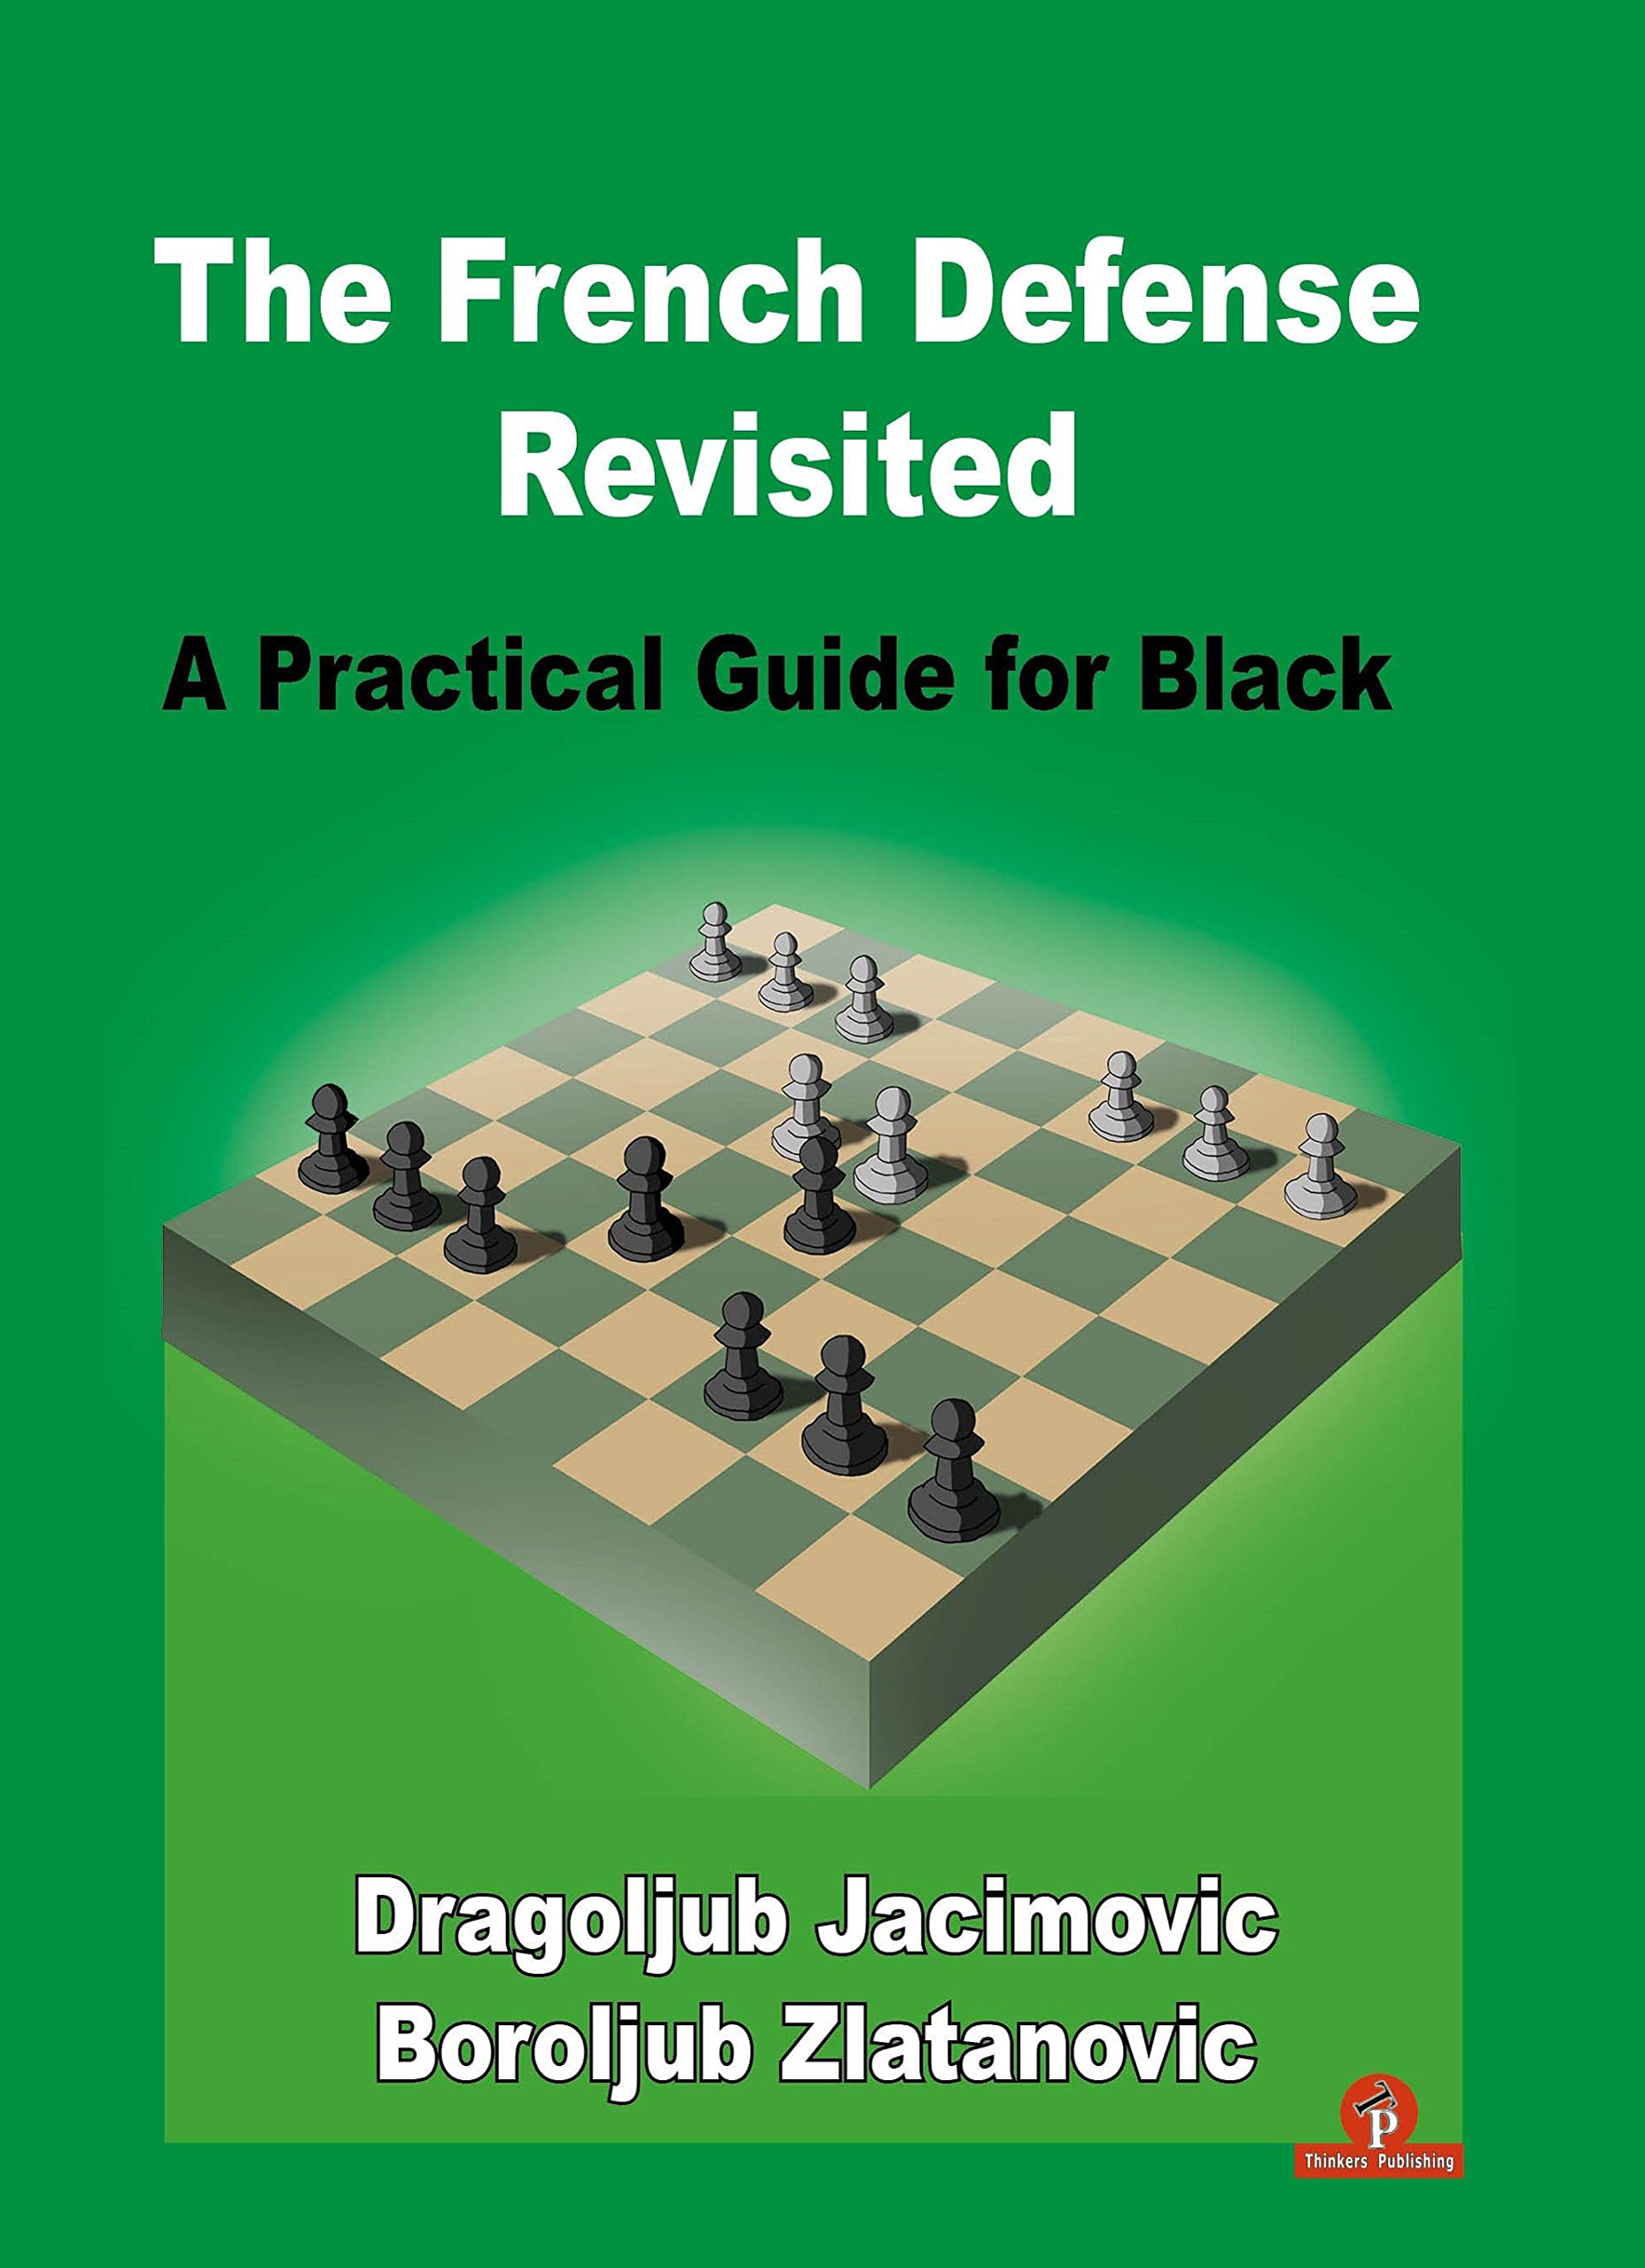 The French Defense Revisited. A Practical Guide for Black